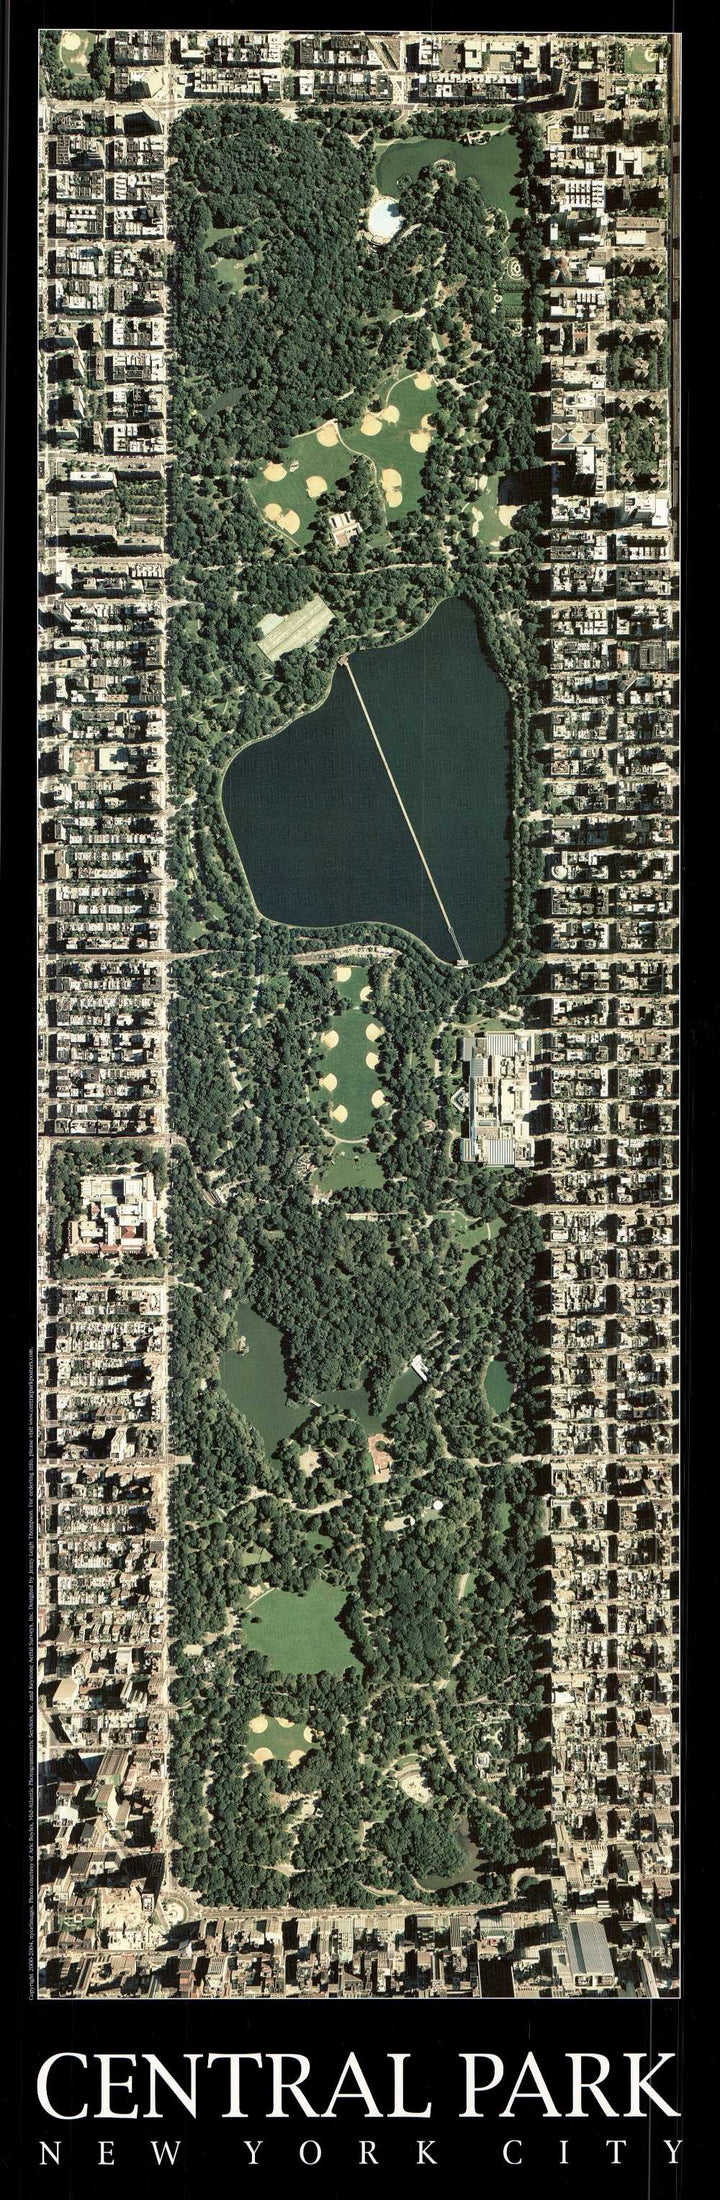 Central Park New York City by Aric Boyles - 13 X 39 Inches (Art Print)